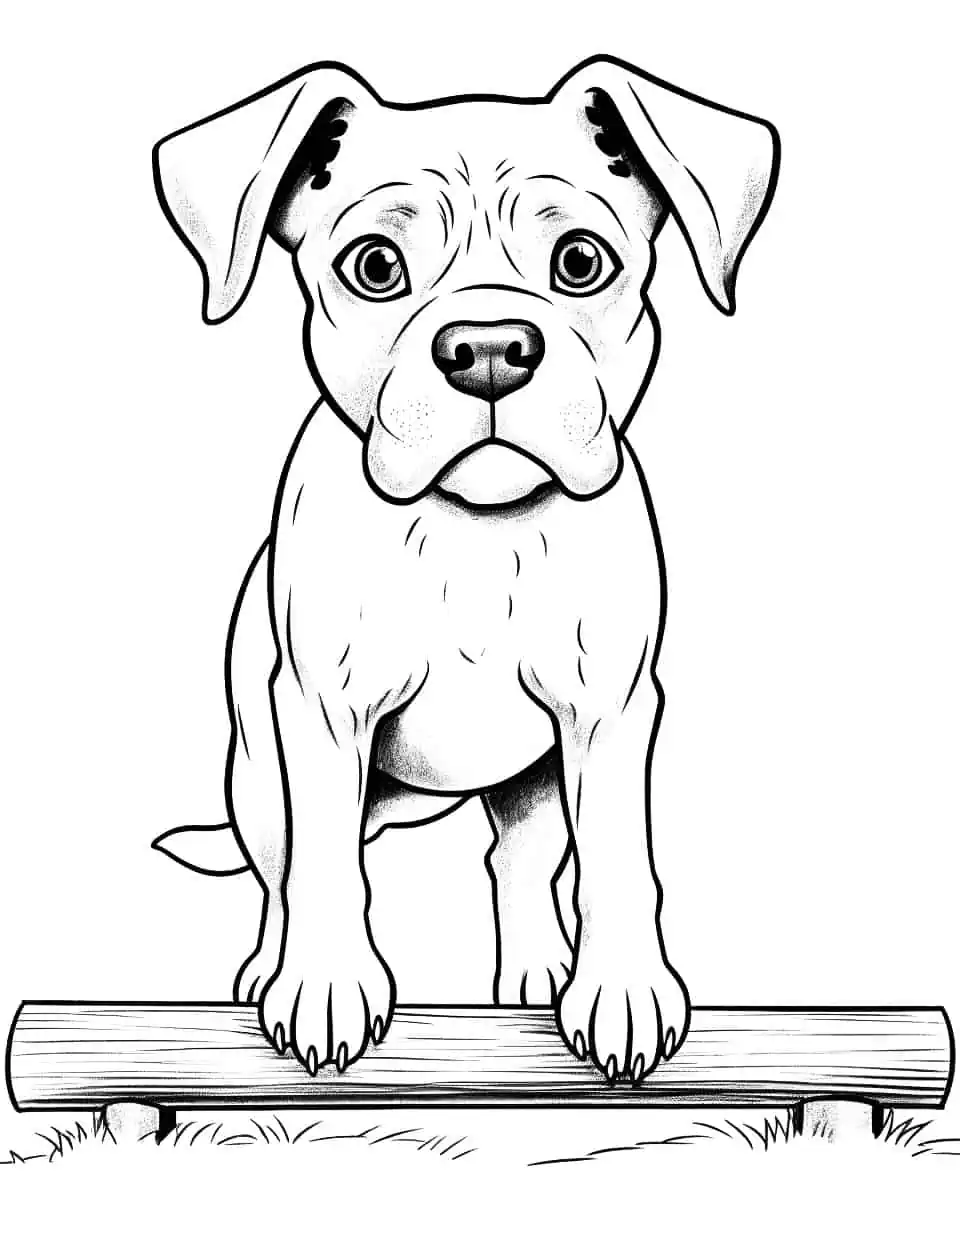 Boxer Training Coloring Page - A strong Boxer dog in the middle of training, doing an agility course.